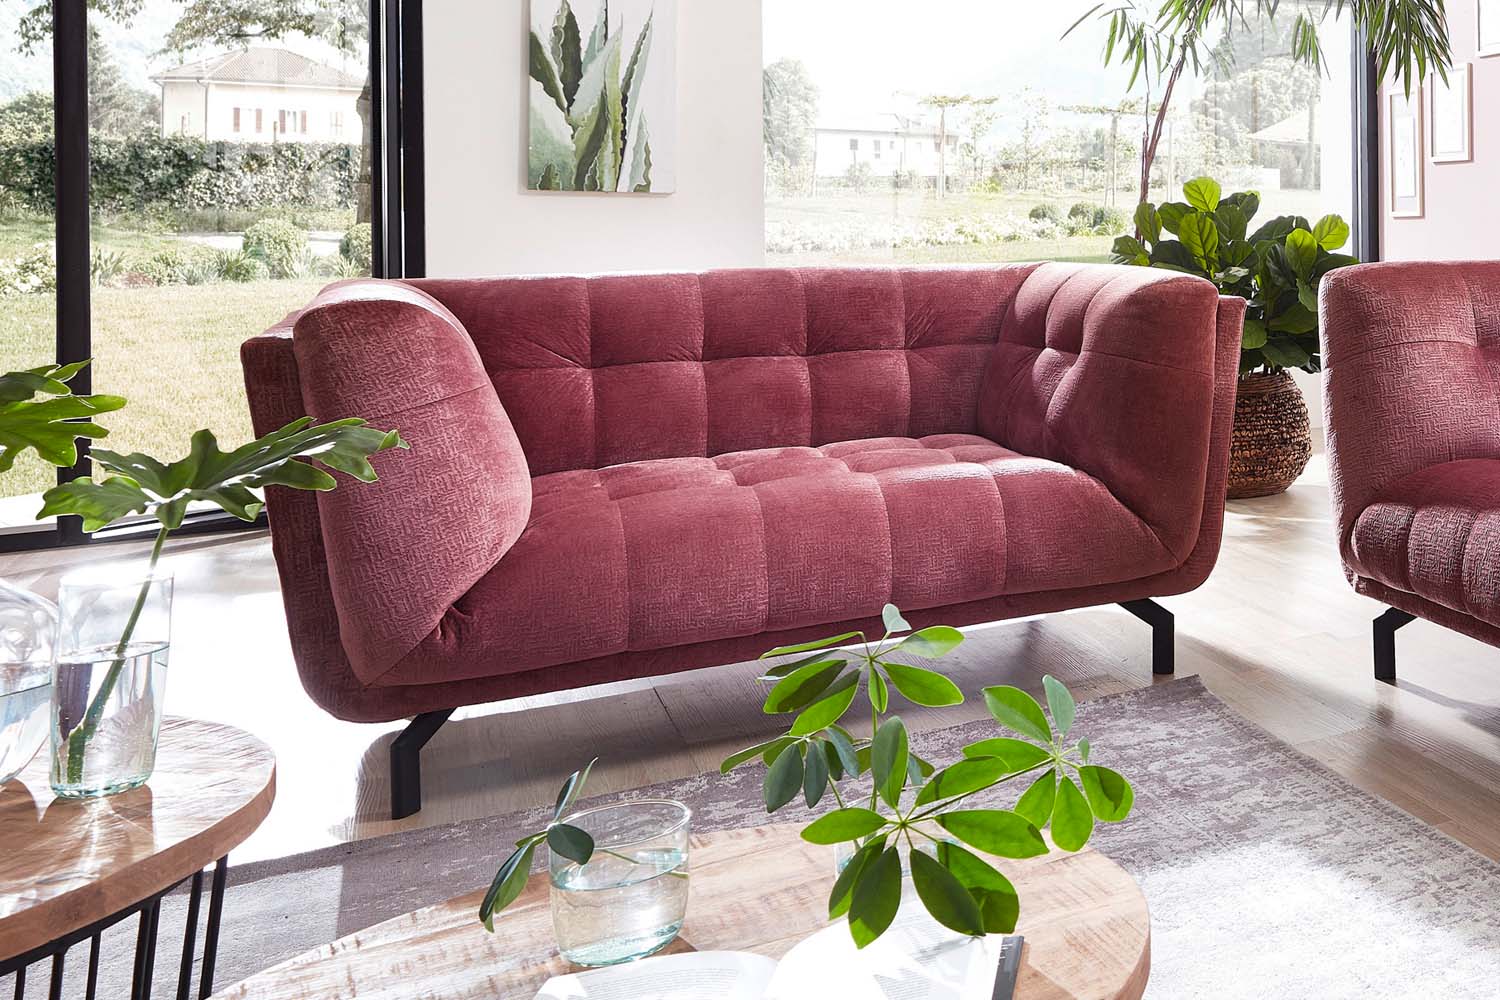 Loveseat cosyhome living 20